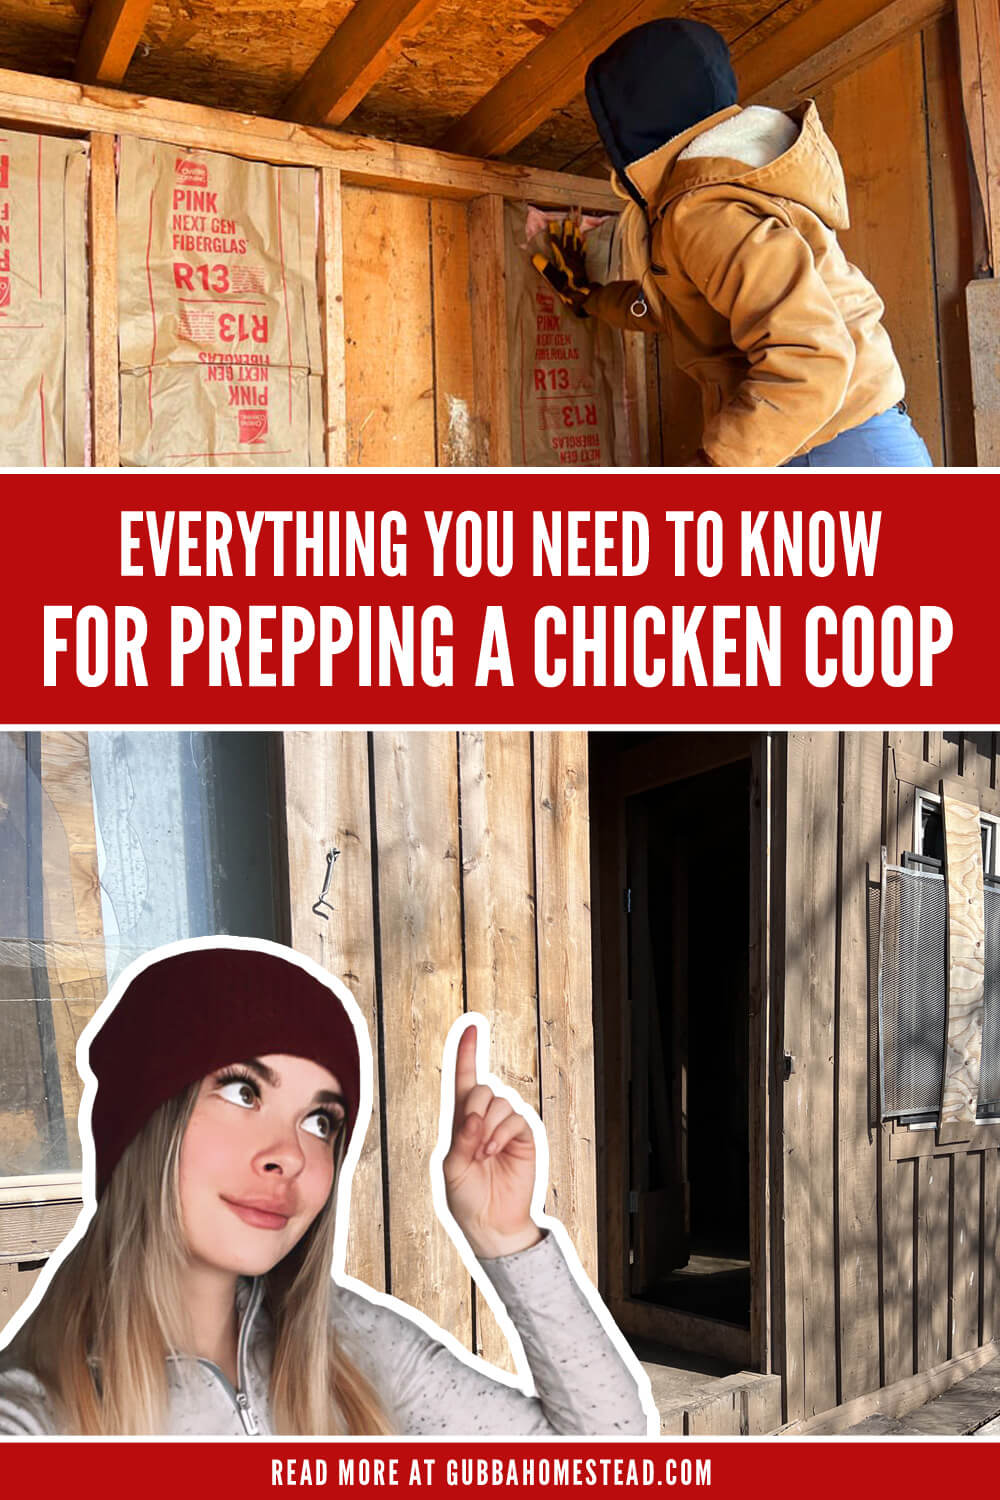 Everything You Need To Know For Prepping a Chicken Coop